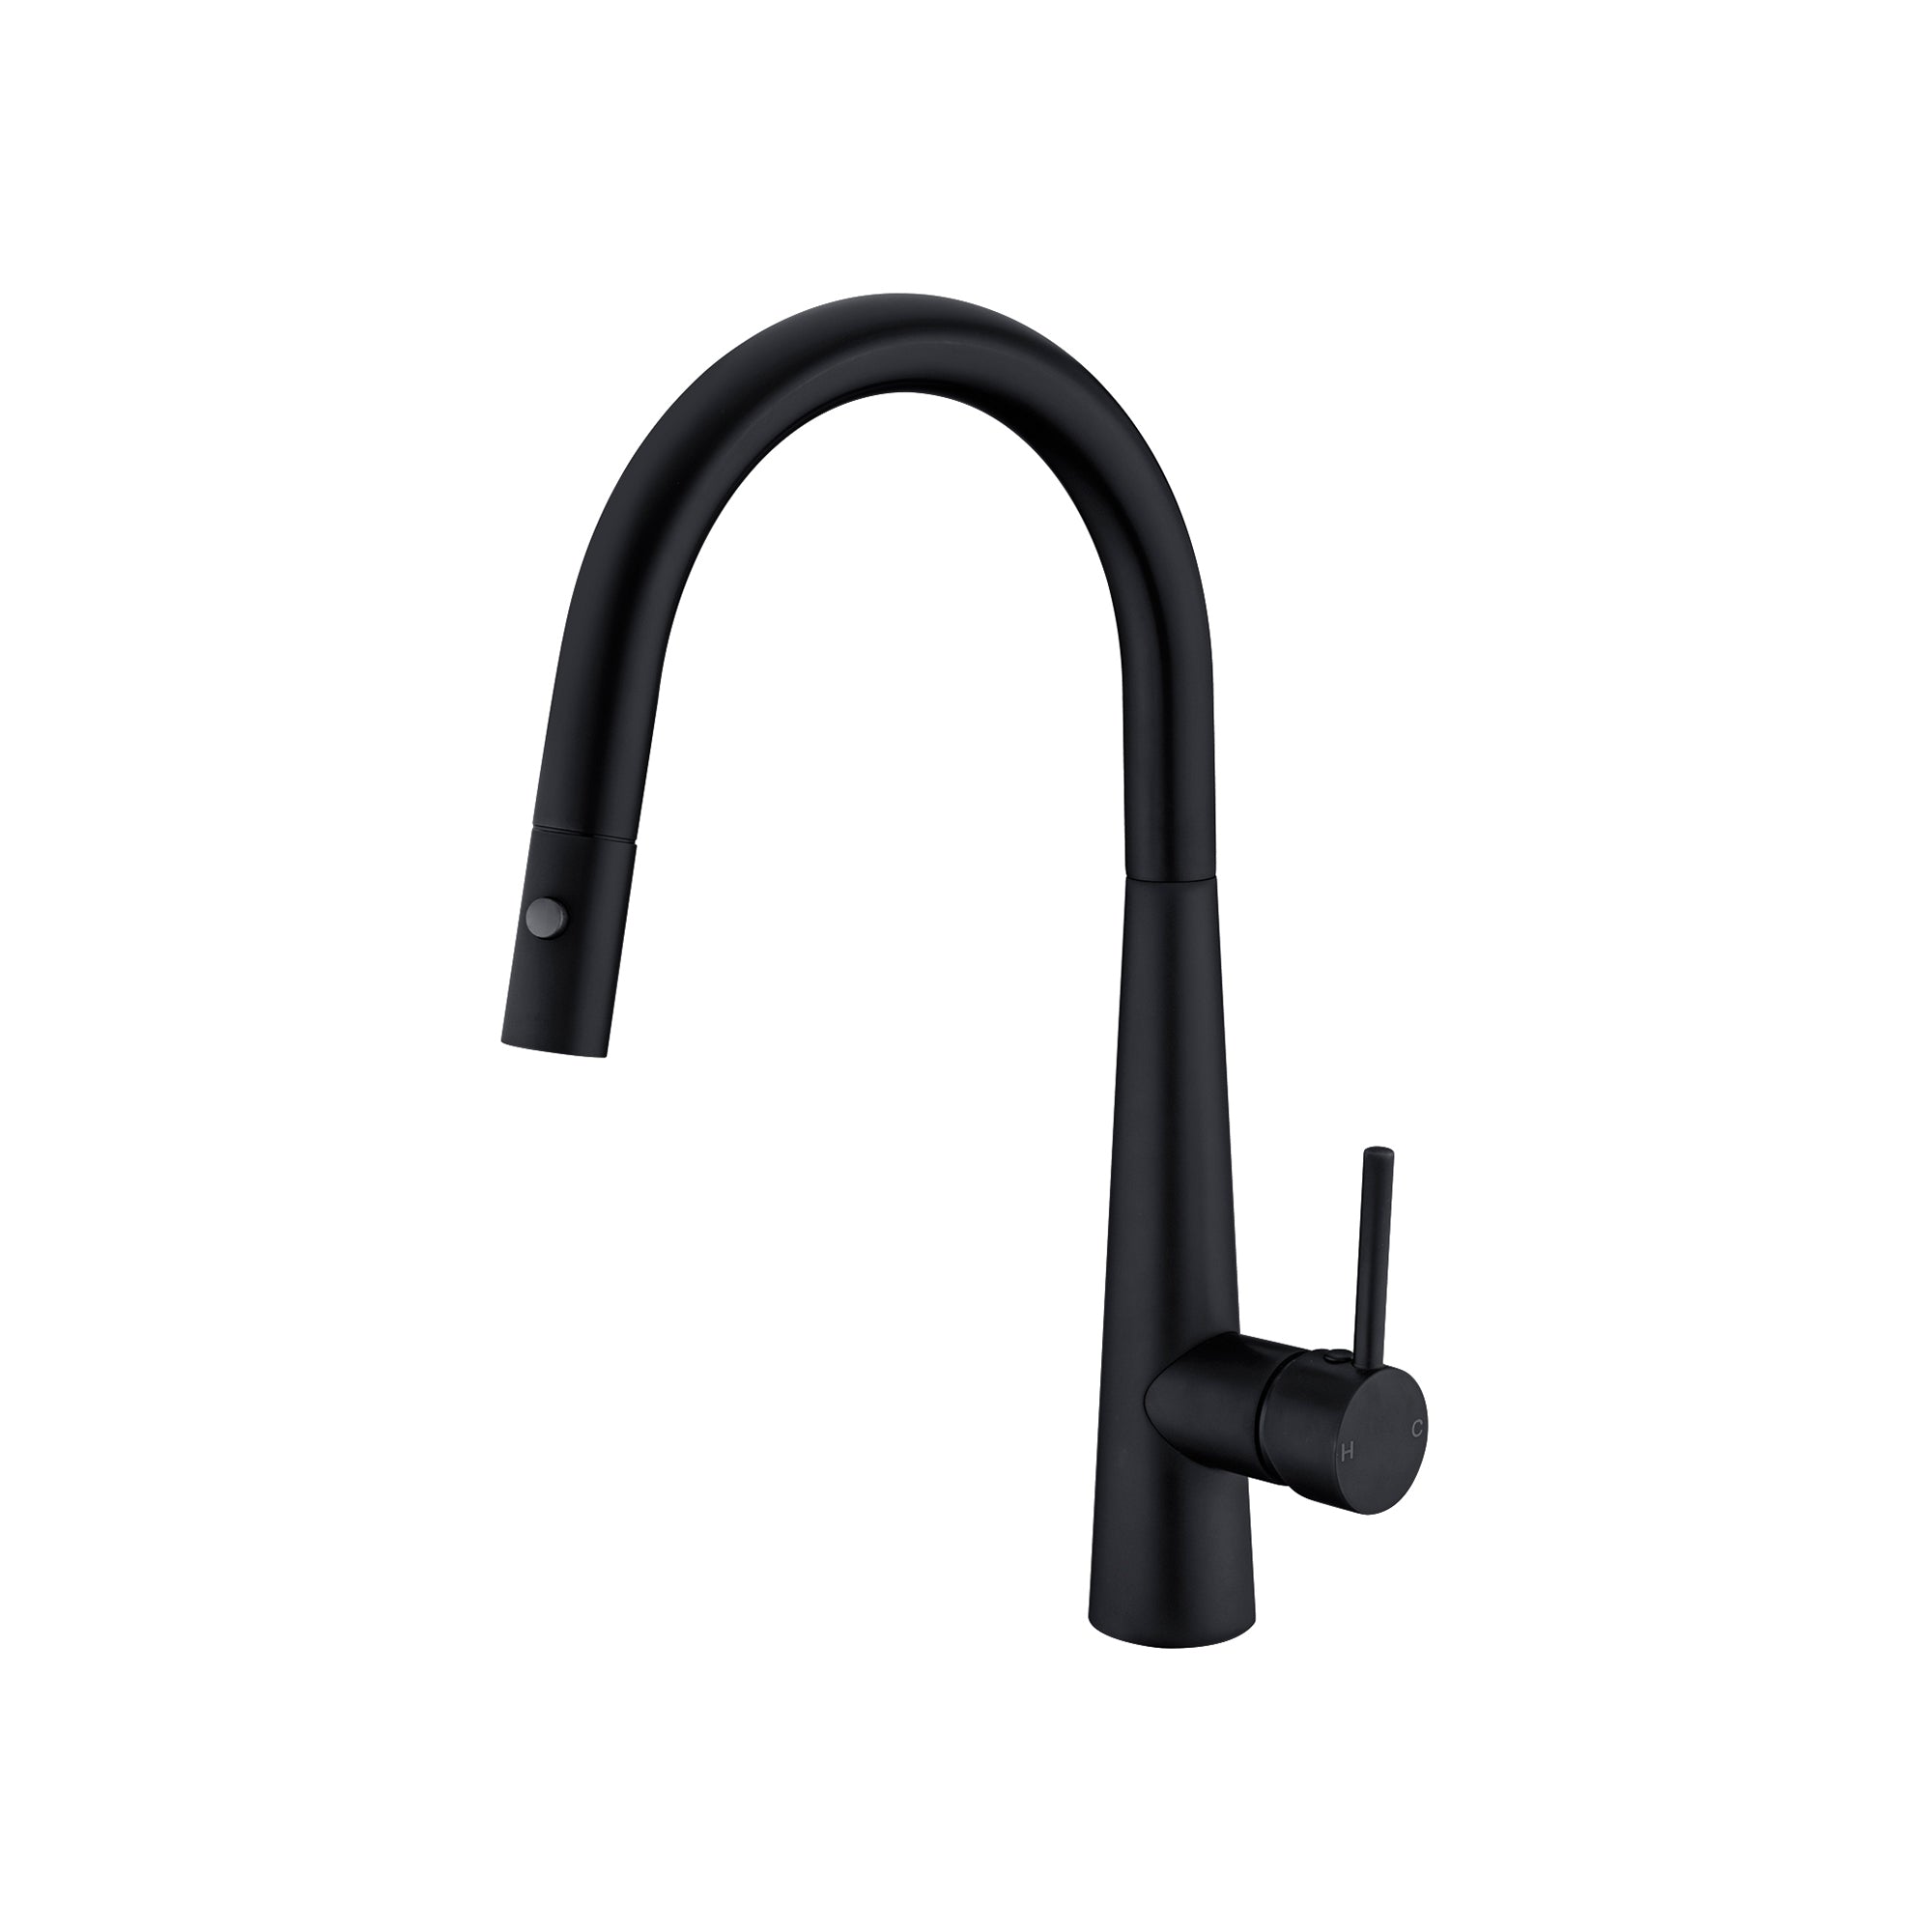 Dolce Pull Out Sink Mixer With Vegie Spray Function Matte Black - NR581009cMB